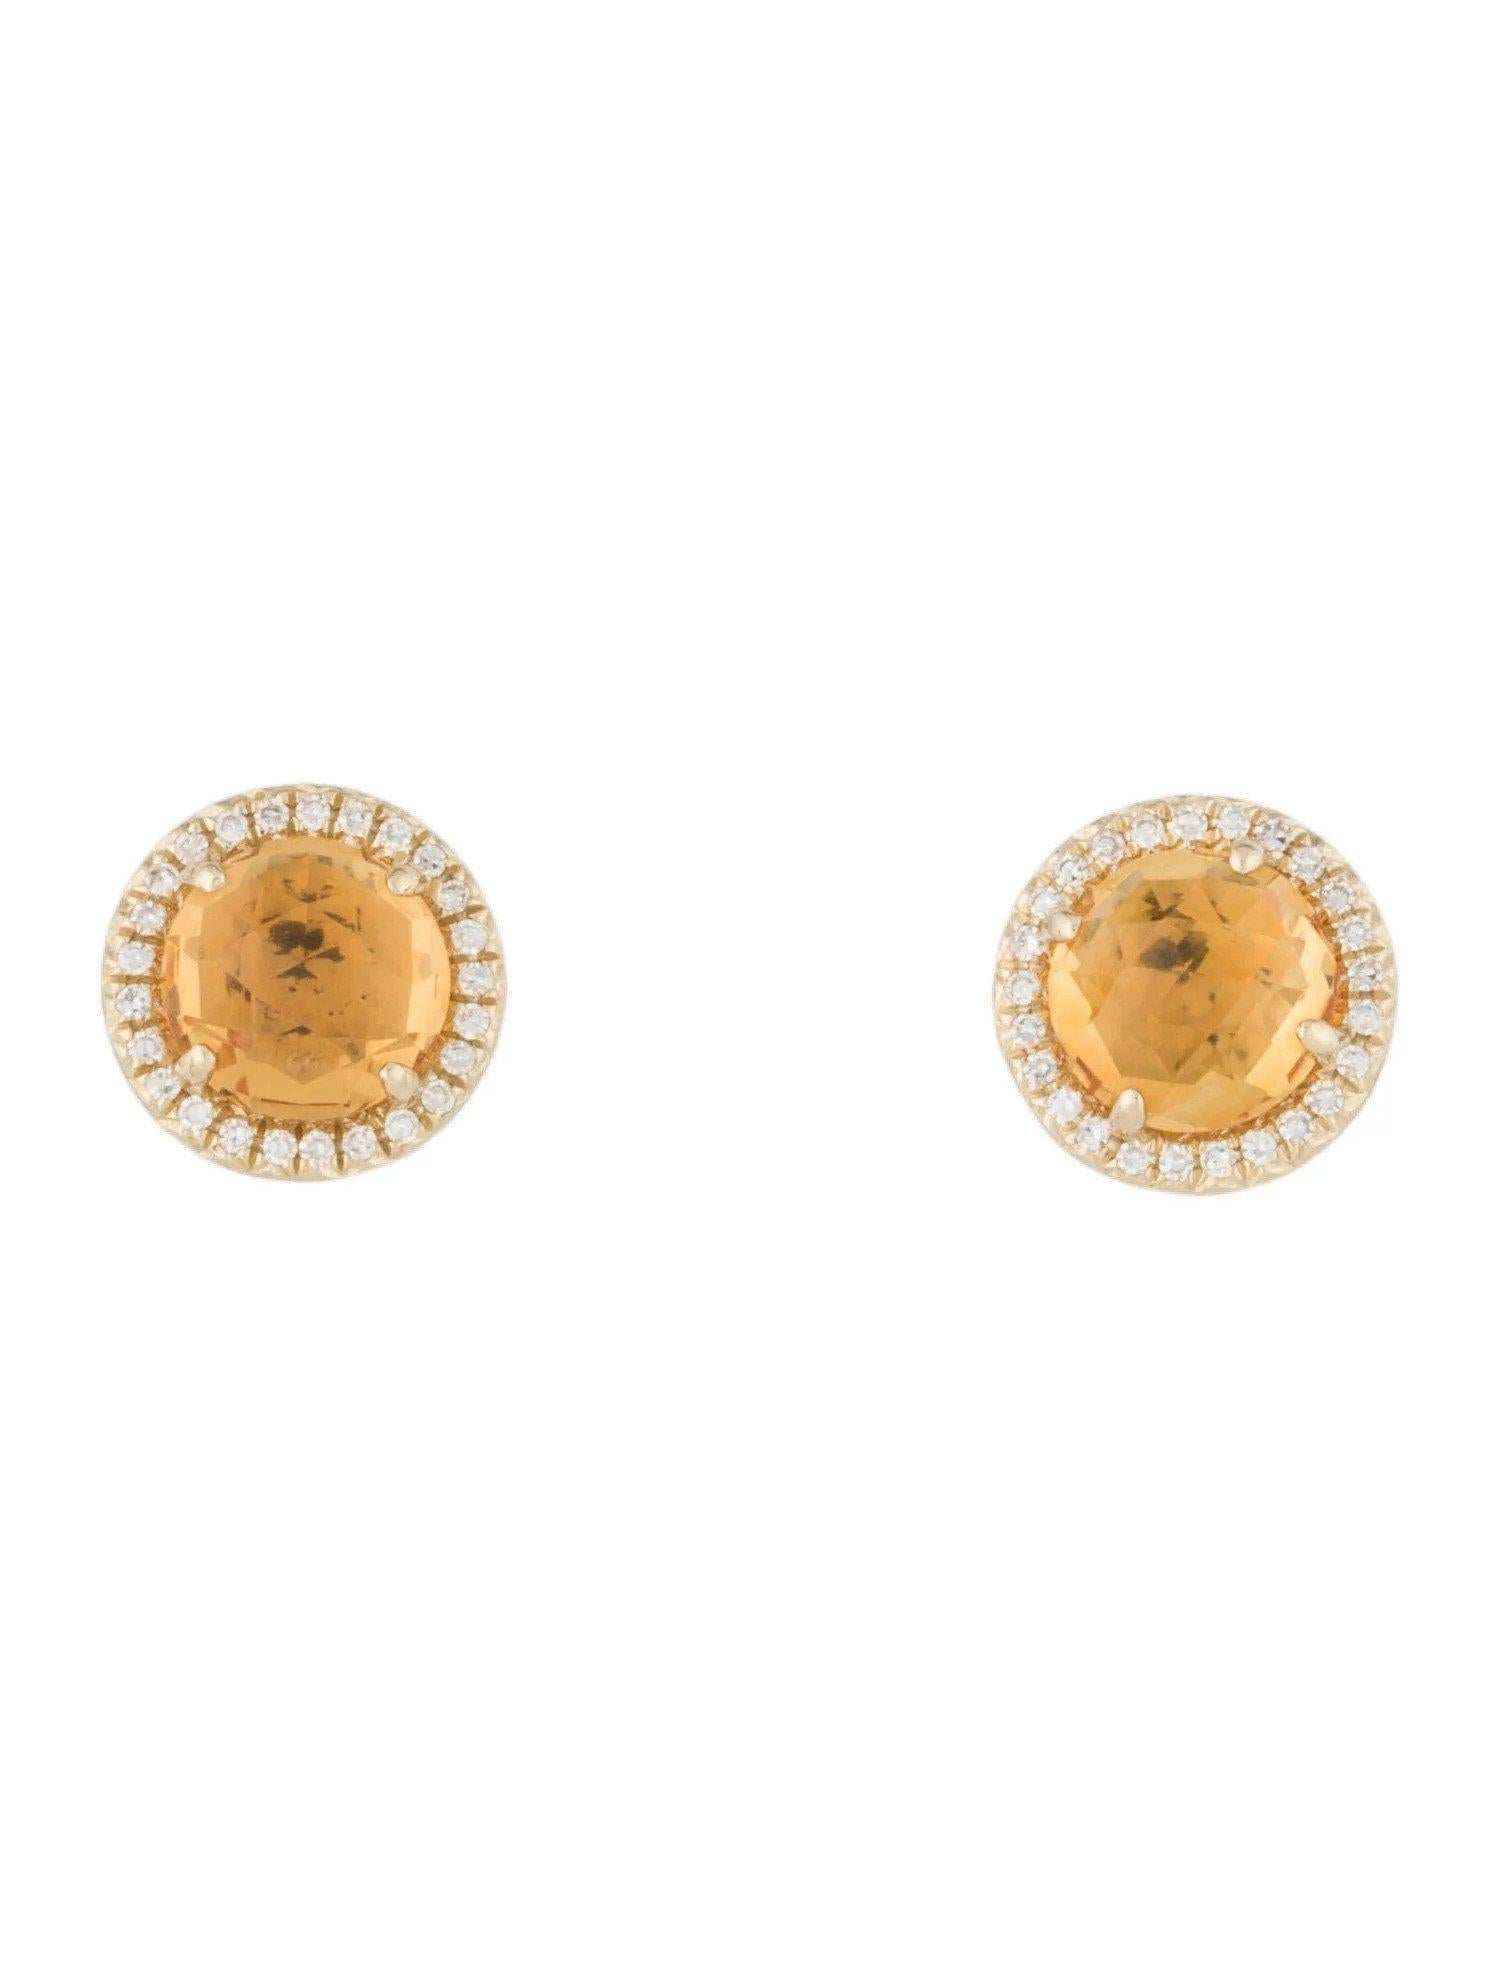 Round Cut 1.83 Carat Round Citrine & Diamond Yellow Gold Stud Earrings  For Sale